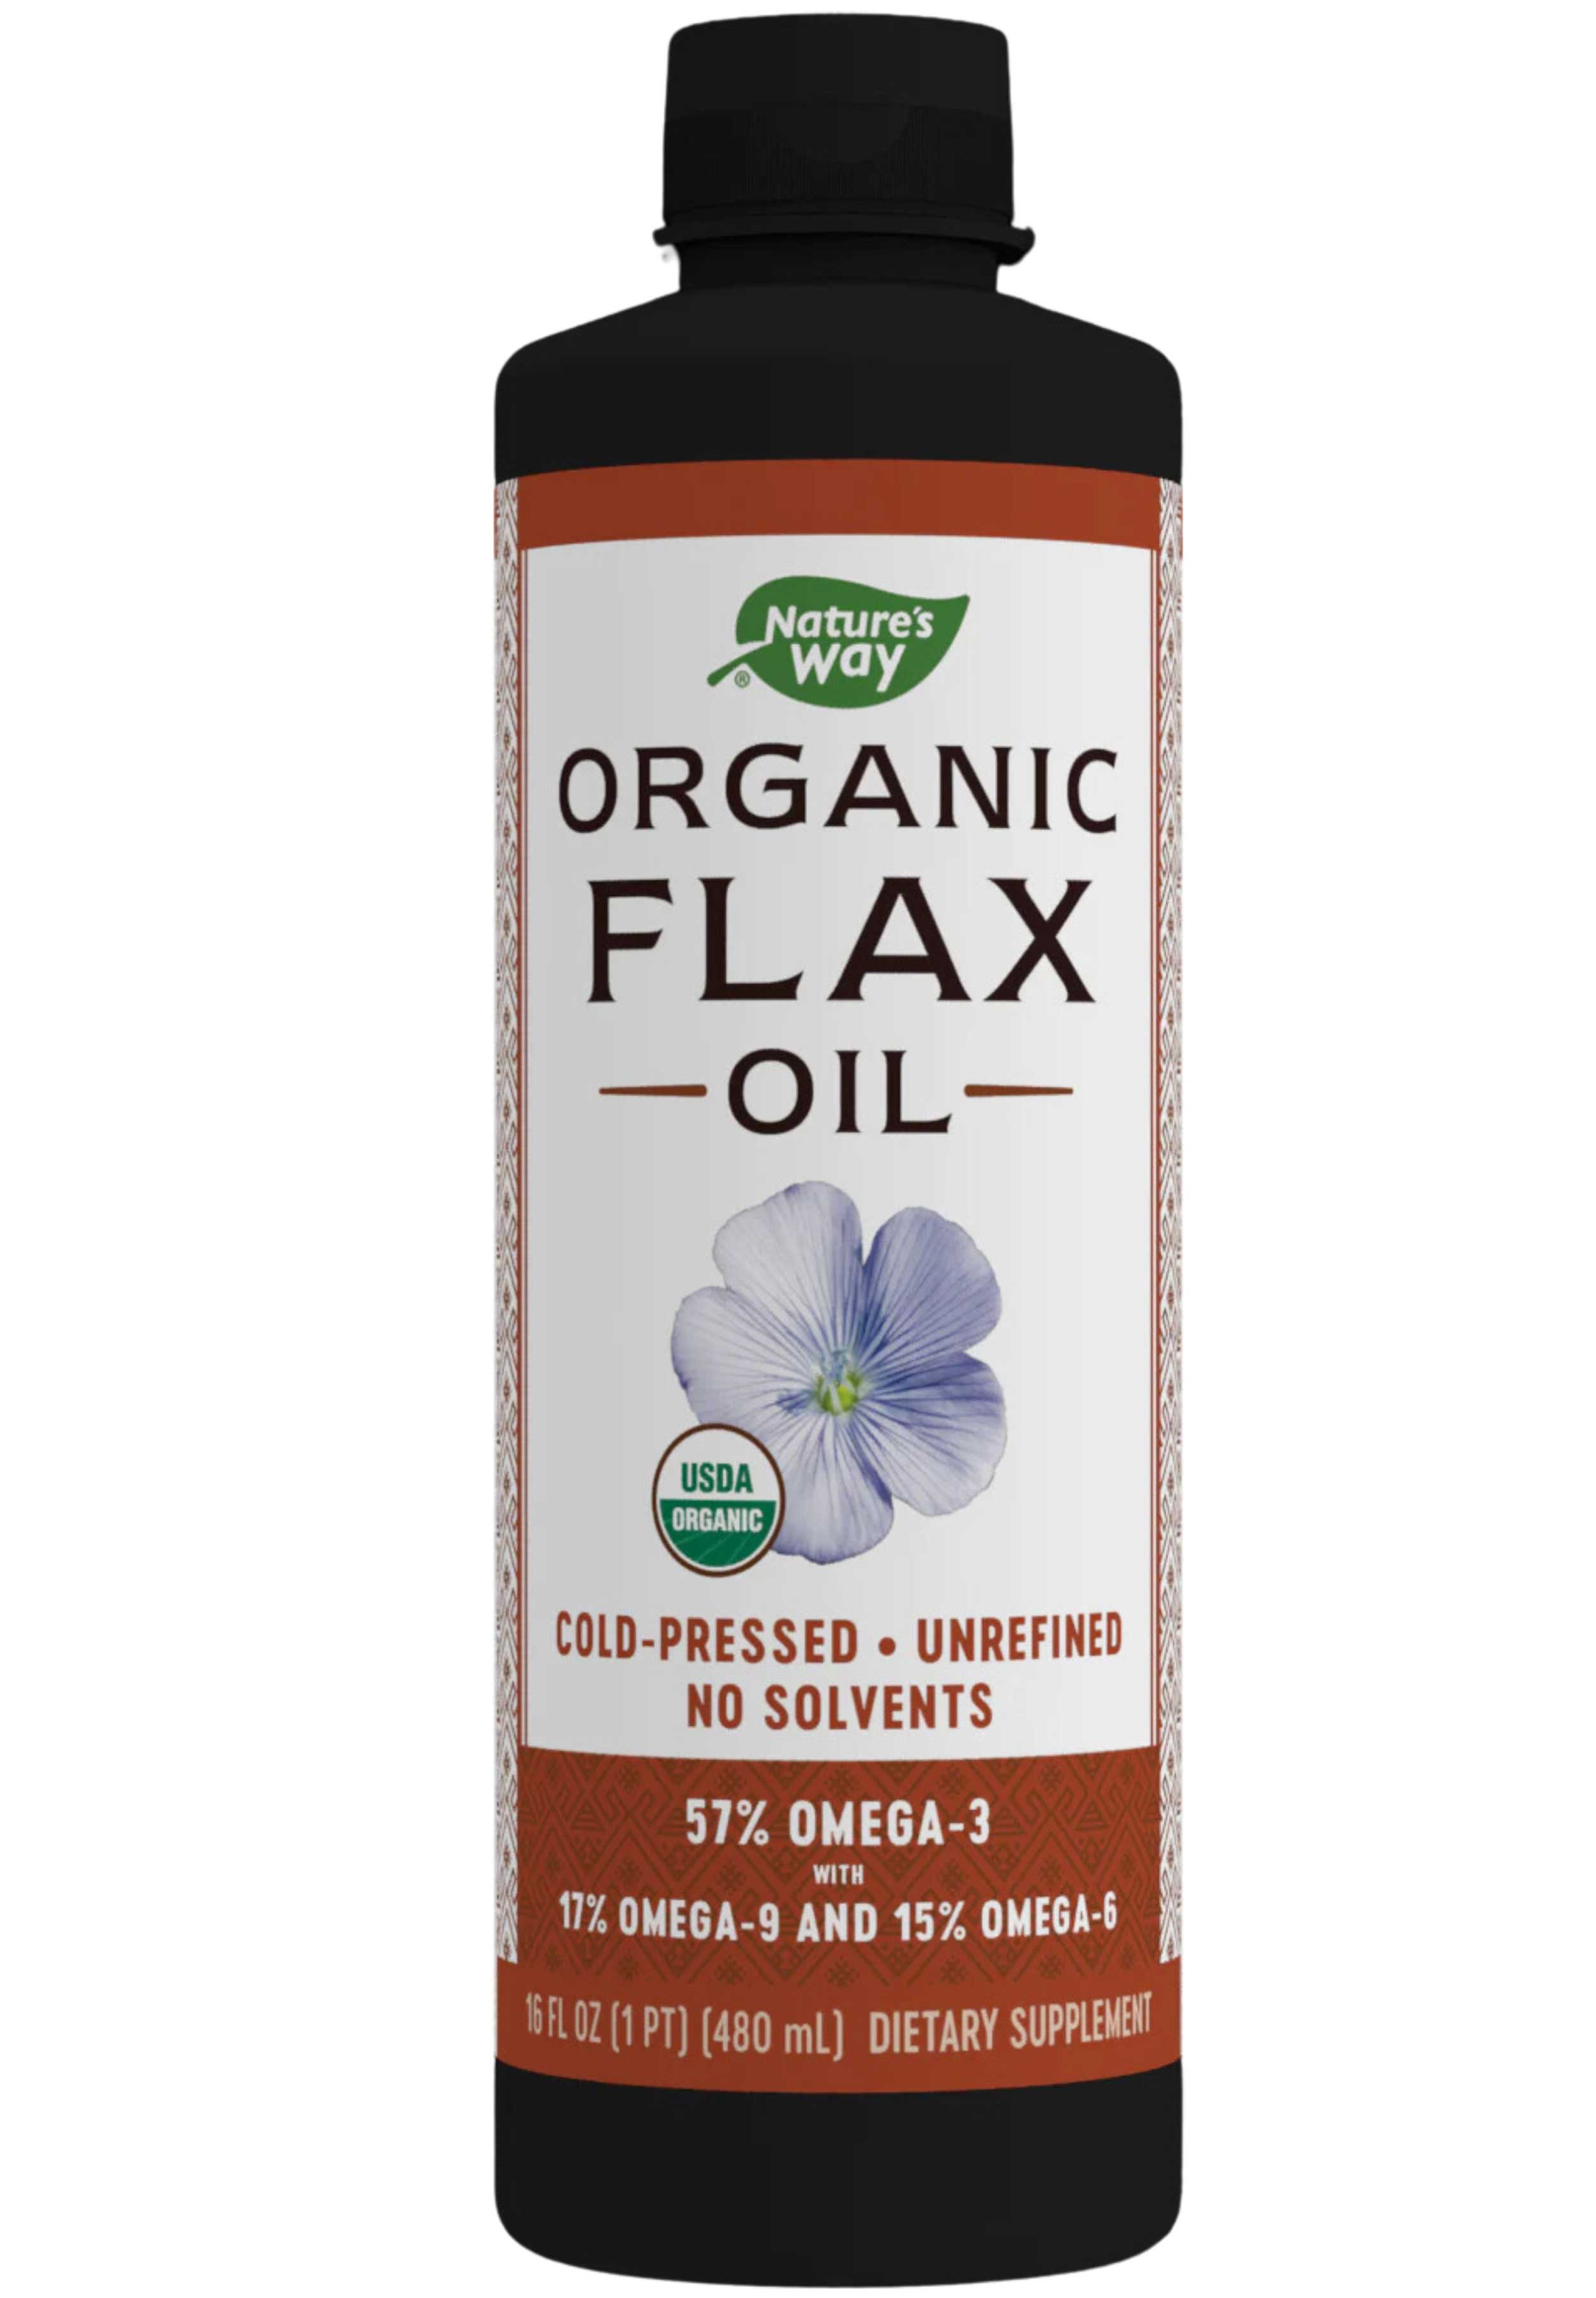 Nature's Way Organic Flax Oil (Formerly EfaGold Organic Flax Oil)